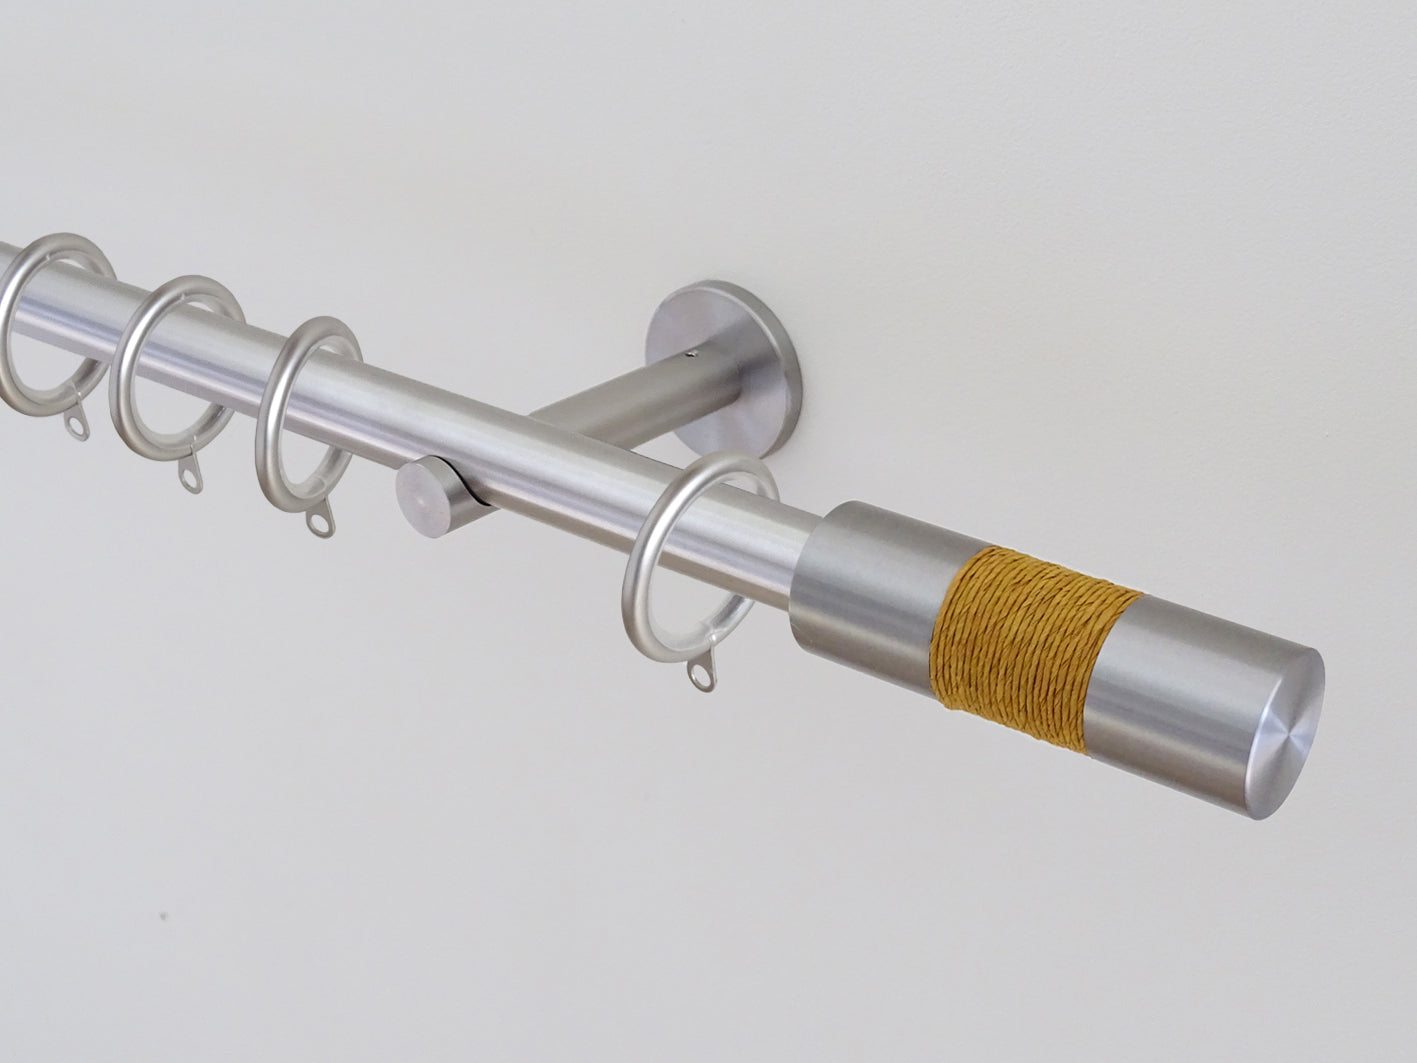 19mm diameter stainless steel curtain pole sets with steel barrel finials in yellow